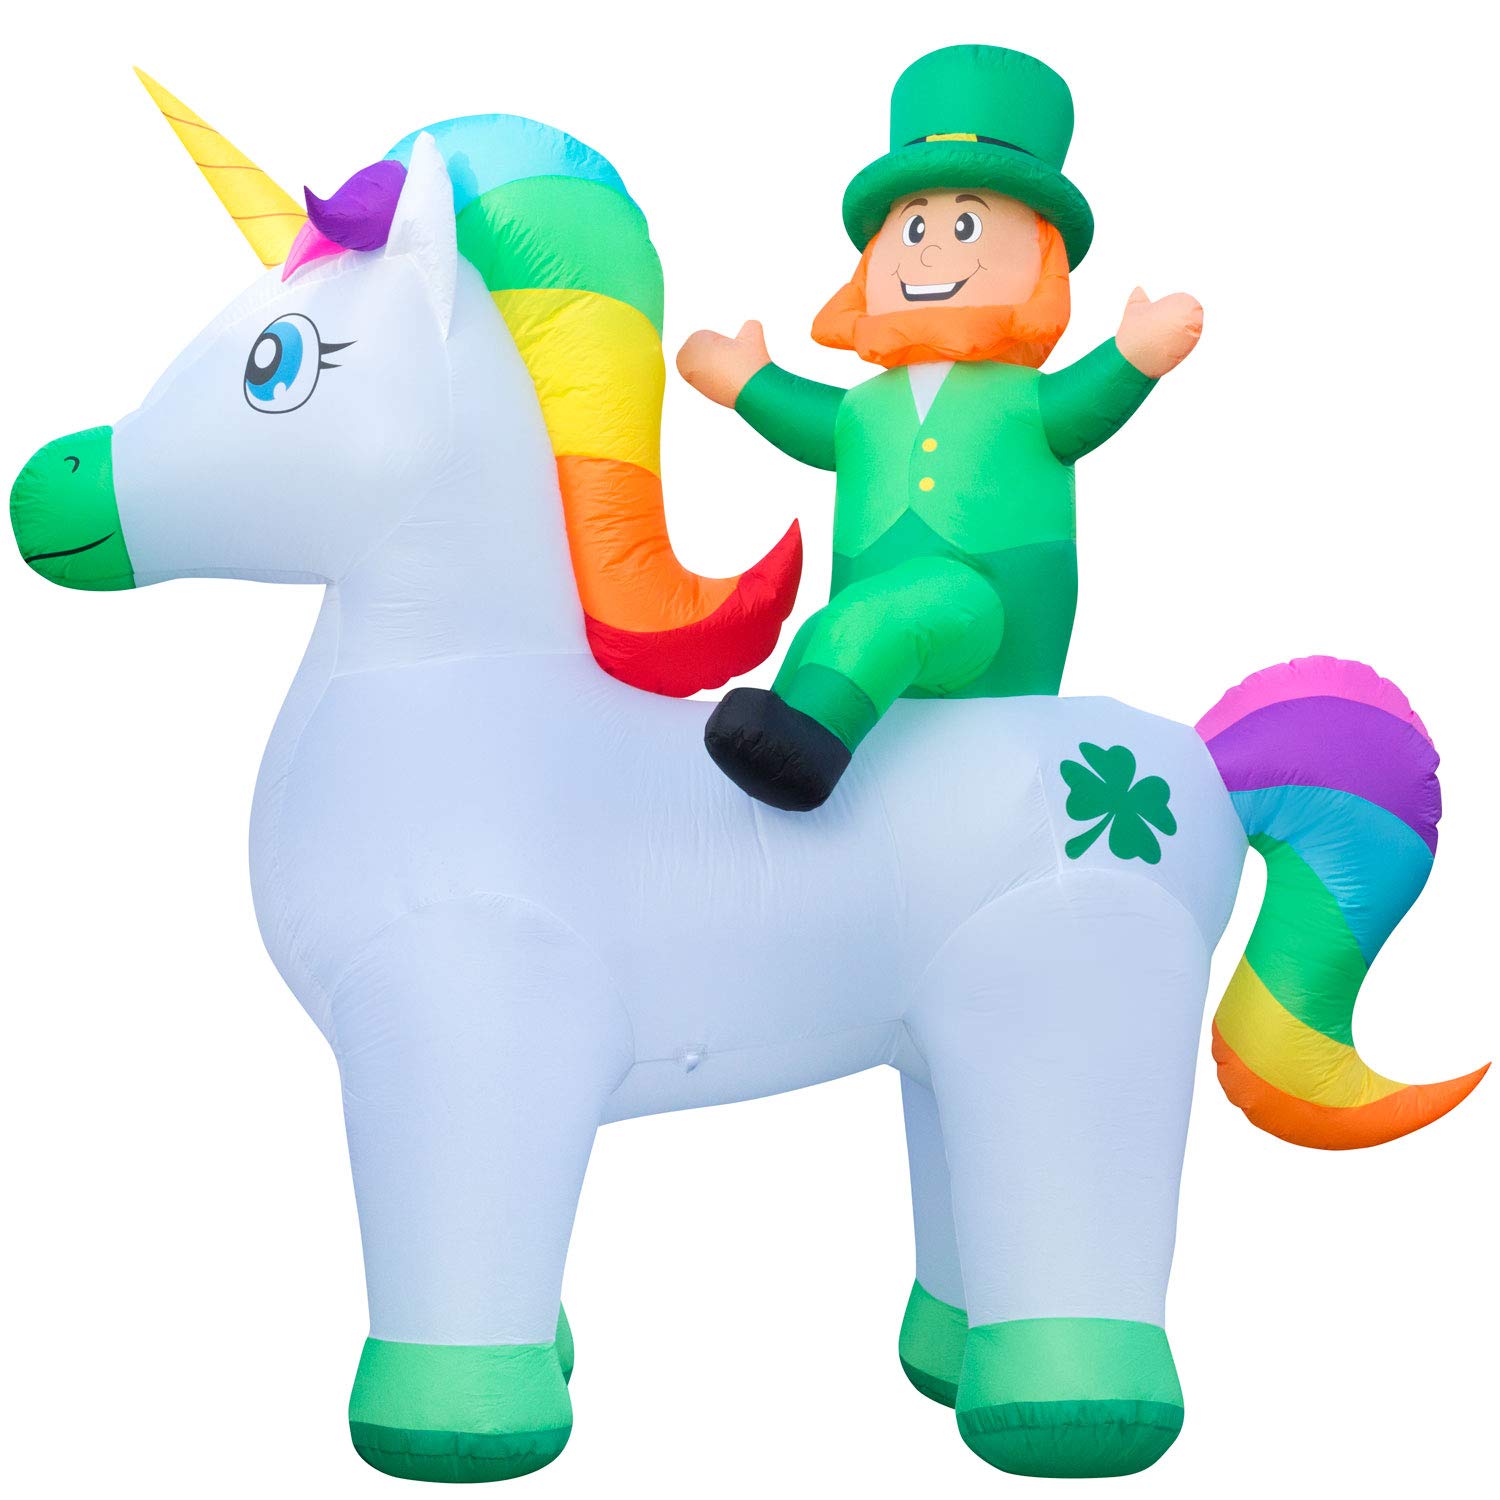 Holidayana 9ft St Patricks Day Inflatable Leprechaun Riding Unicorn - Leprechaun and Magical Unicorn Blow Up Yard Decoration, Includes Built-in Bulbs, Tie-Down Points, and Powerful Built-in Fan